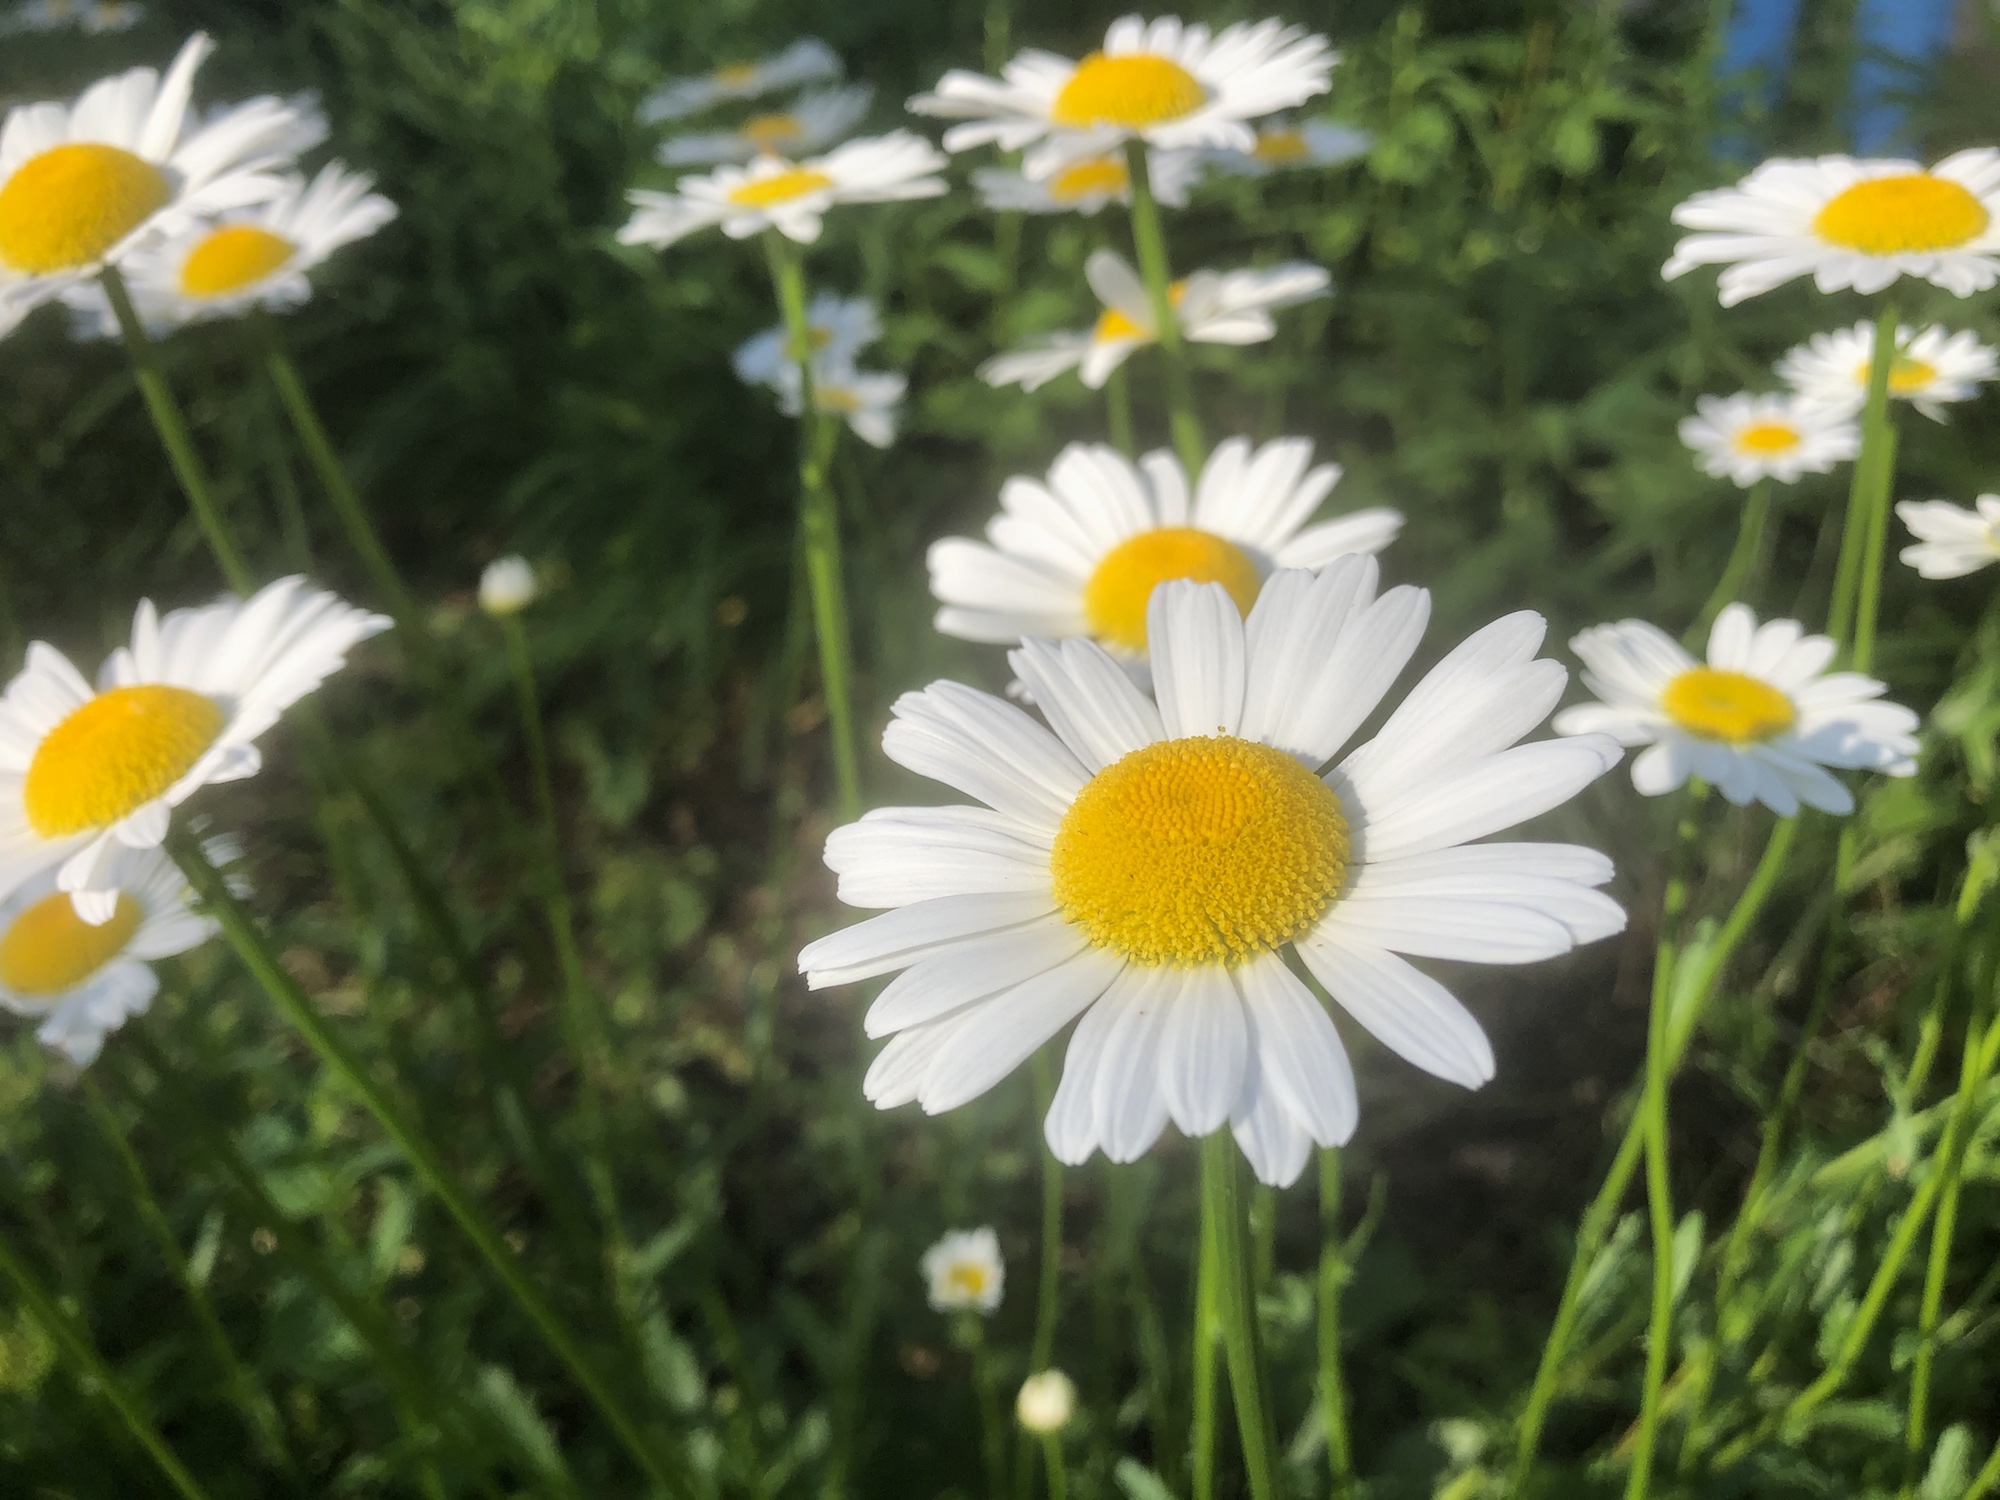 Ox-eye Daisies by Wingra Boats in Madison, Wisconsin on June 10, 2020.